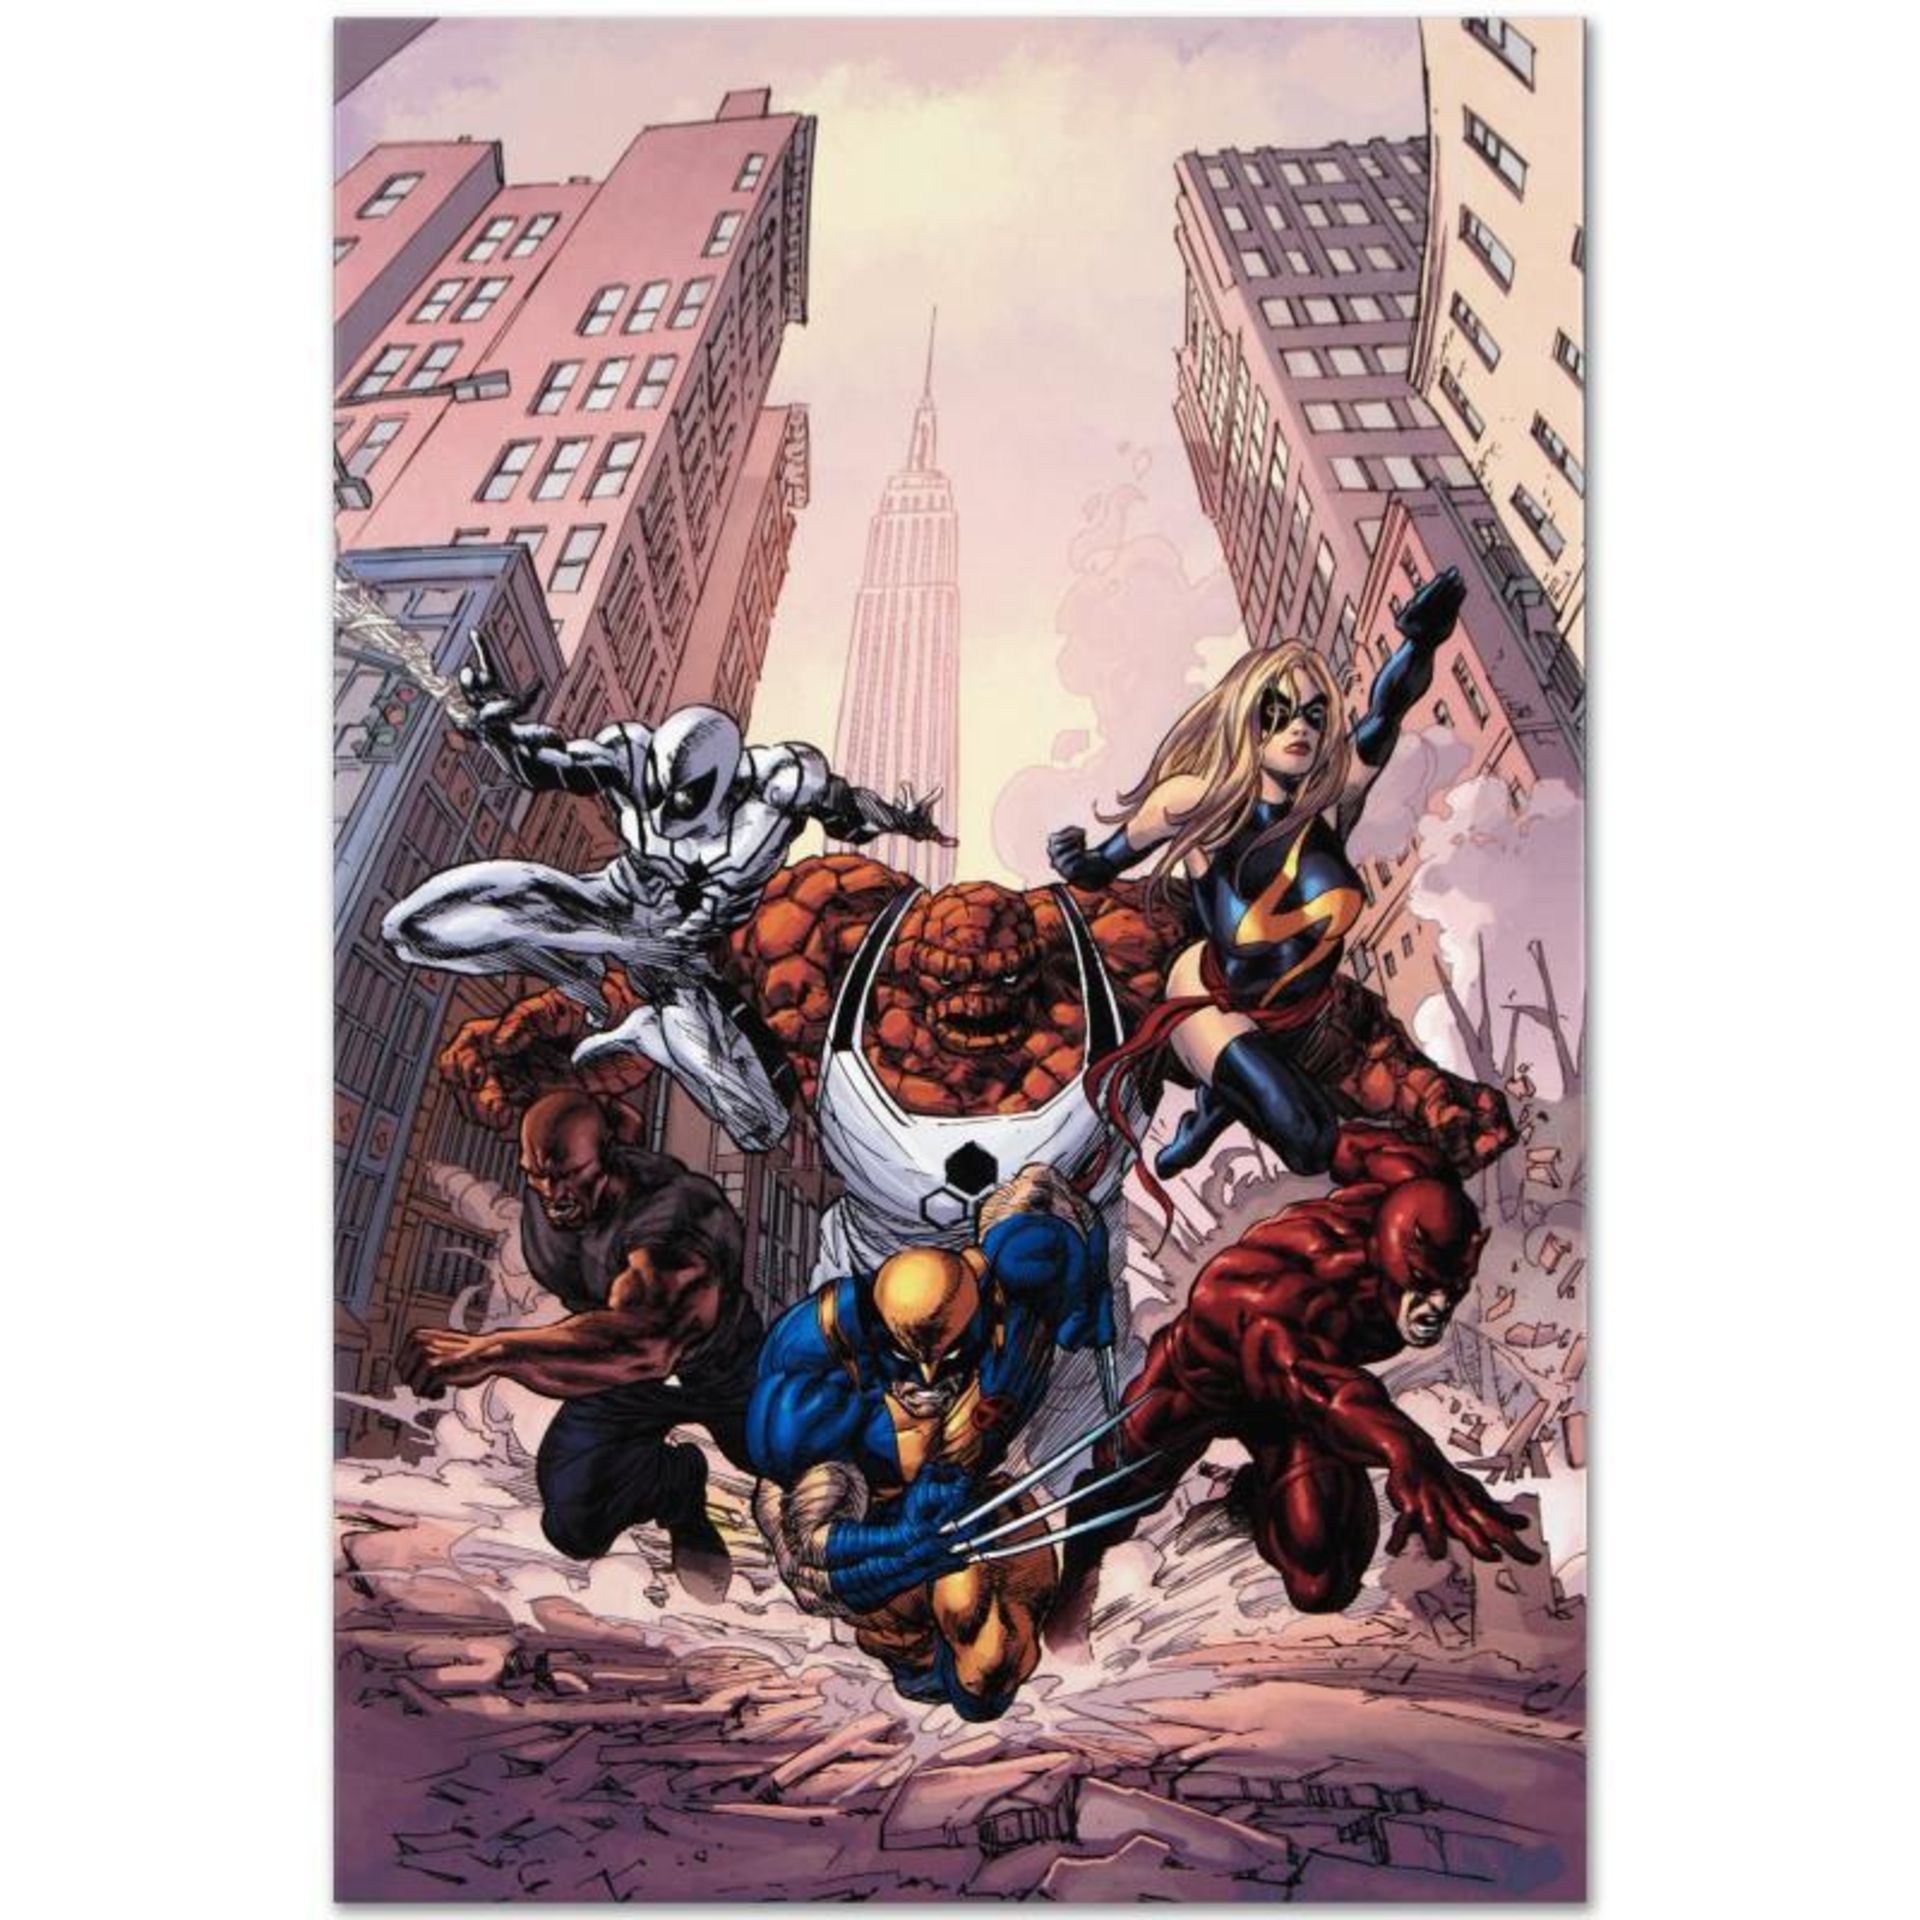 Marvel Comics "New Avengers #17" Numbered Limited Edition Giclee on Canvas by Mi